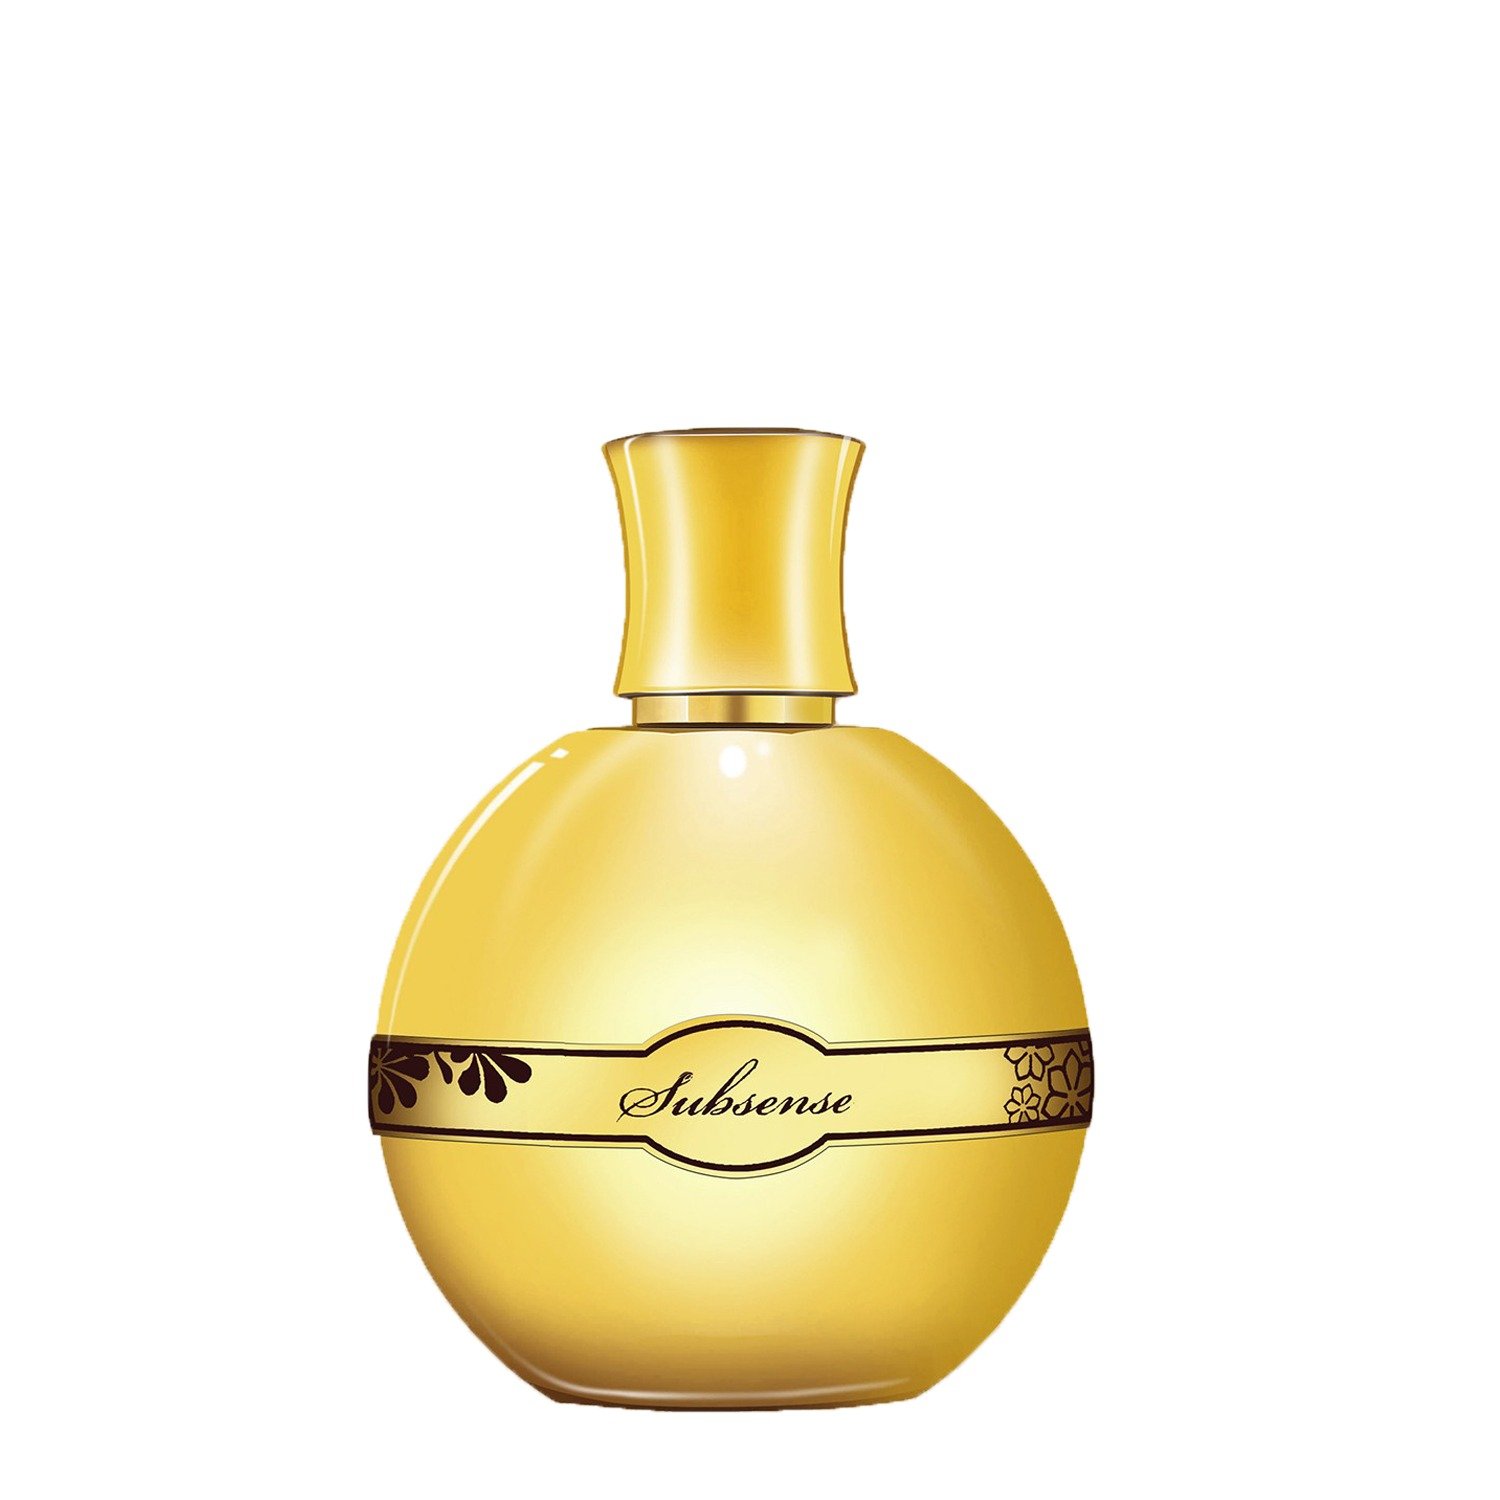 Exotic Gold by Louis Cardin » Reviews & Perfume Facts